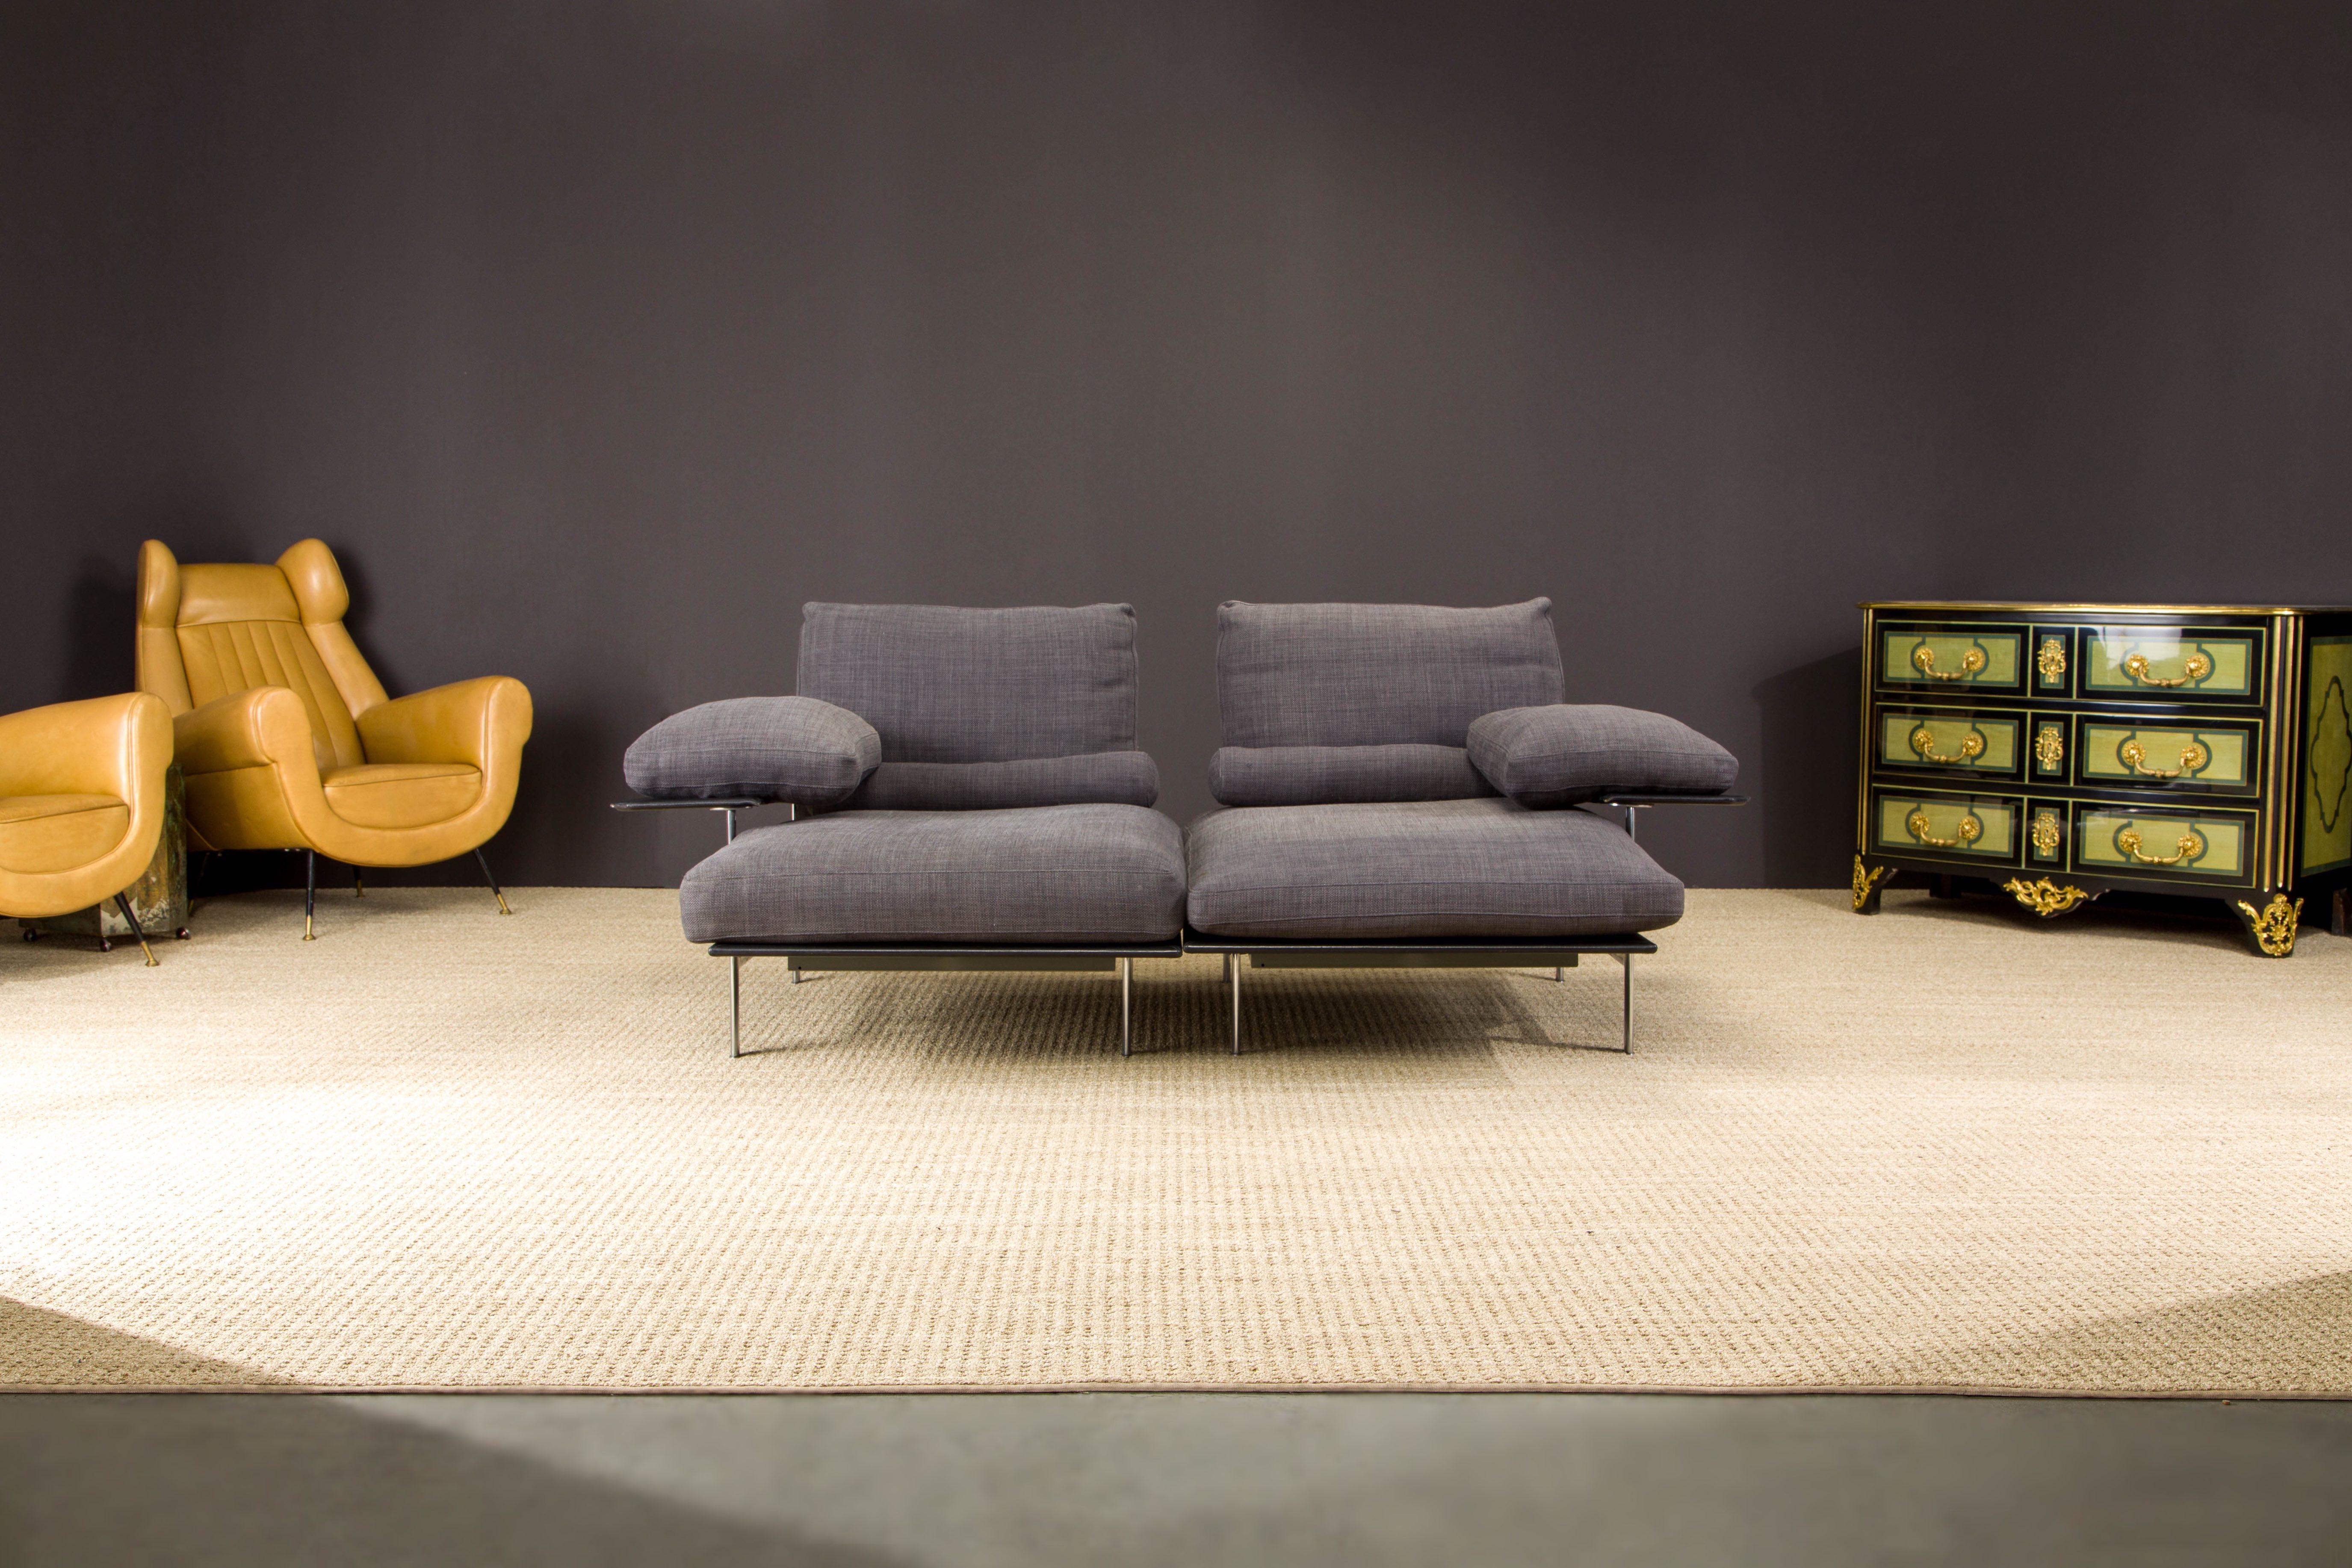 This elegant pair of 'Diesis' left-arm and right-arm chaise lounges were designed in 1979 by Paolo Nava & Antonio Citterio for B&B Italia and when placed together make an excellent and extremely comfortable daybed (or bed bed for that matter).